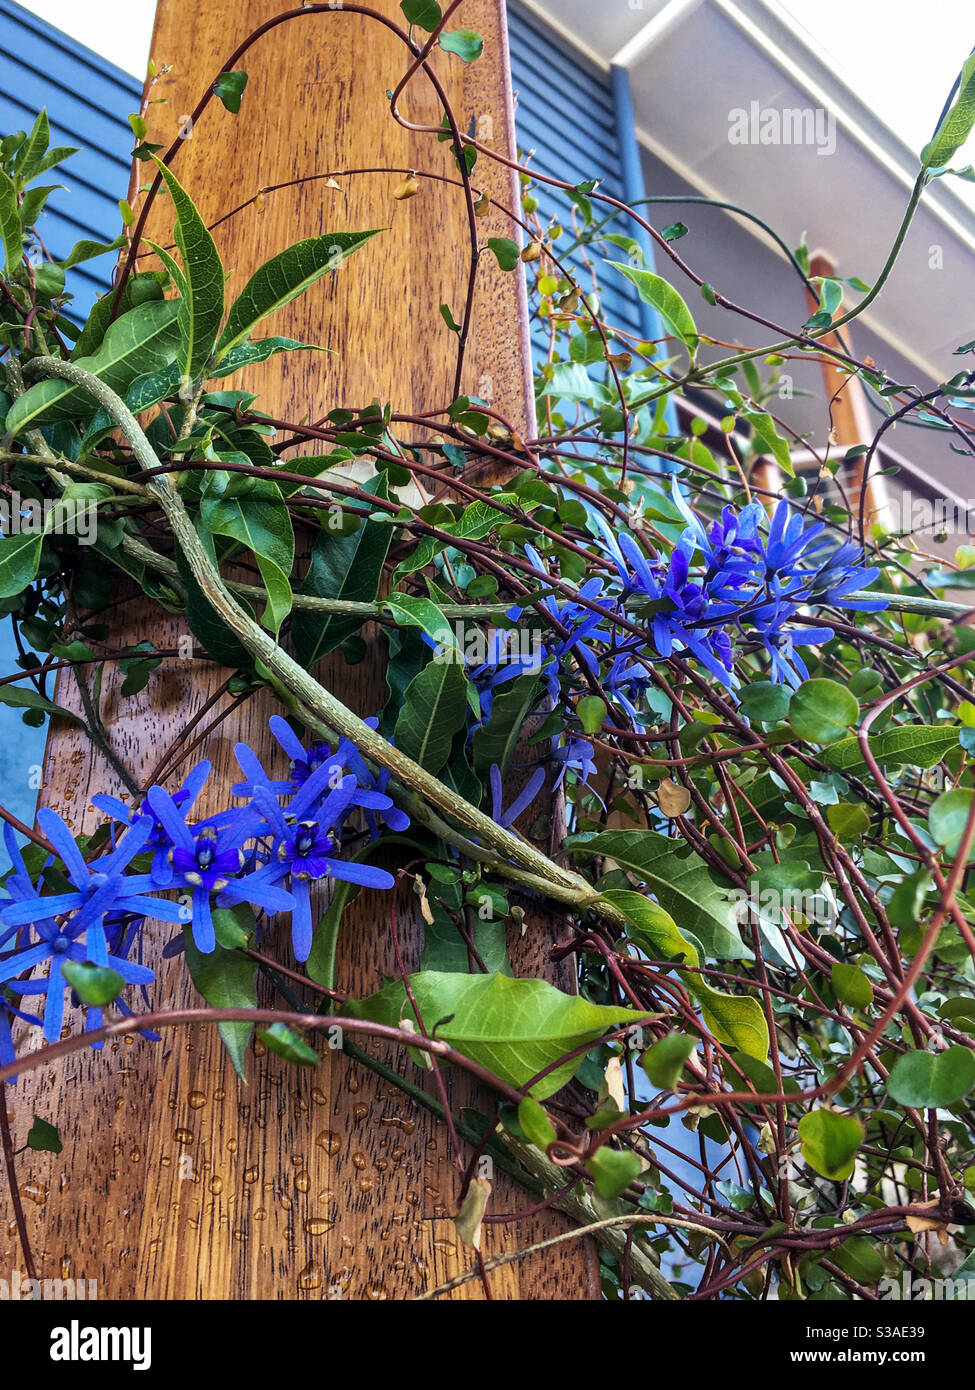 Tangled, purple flowering climbing petrea and maidenhair fern vines wrapped around a wooden pole on the outside of a grey weatherboard house Stock Photo